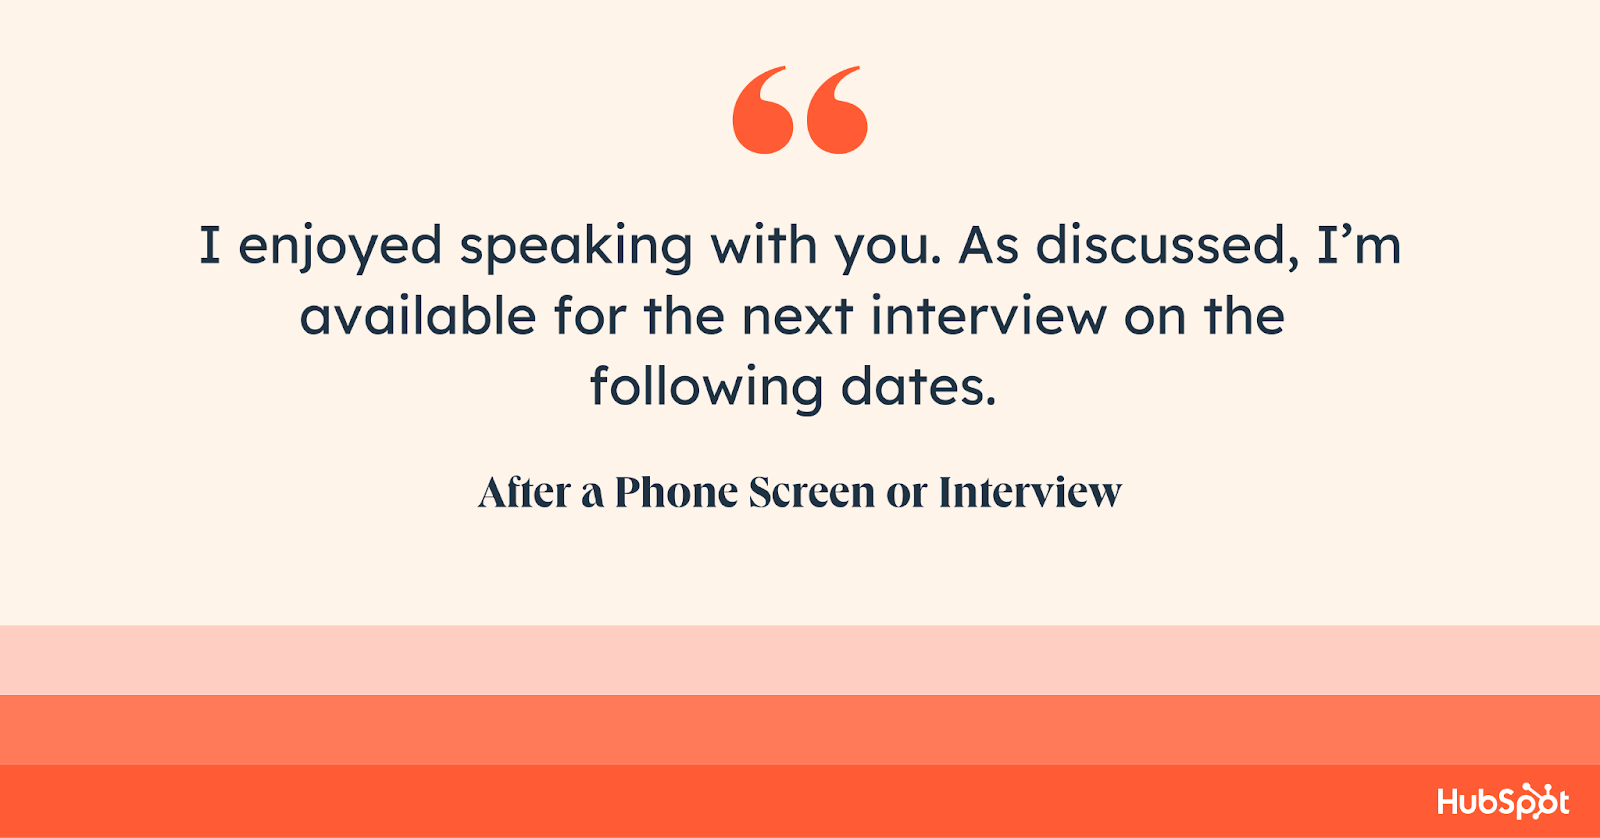 how to end an email after a phone screen. I enjoyed speaking with you. As discussed, I’m available for the next interview on the following dates.